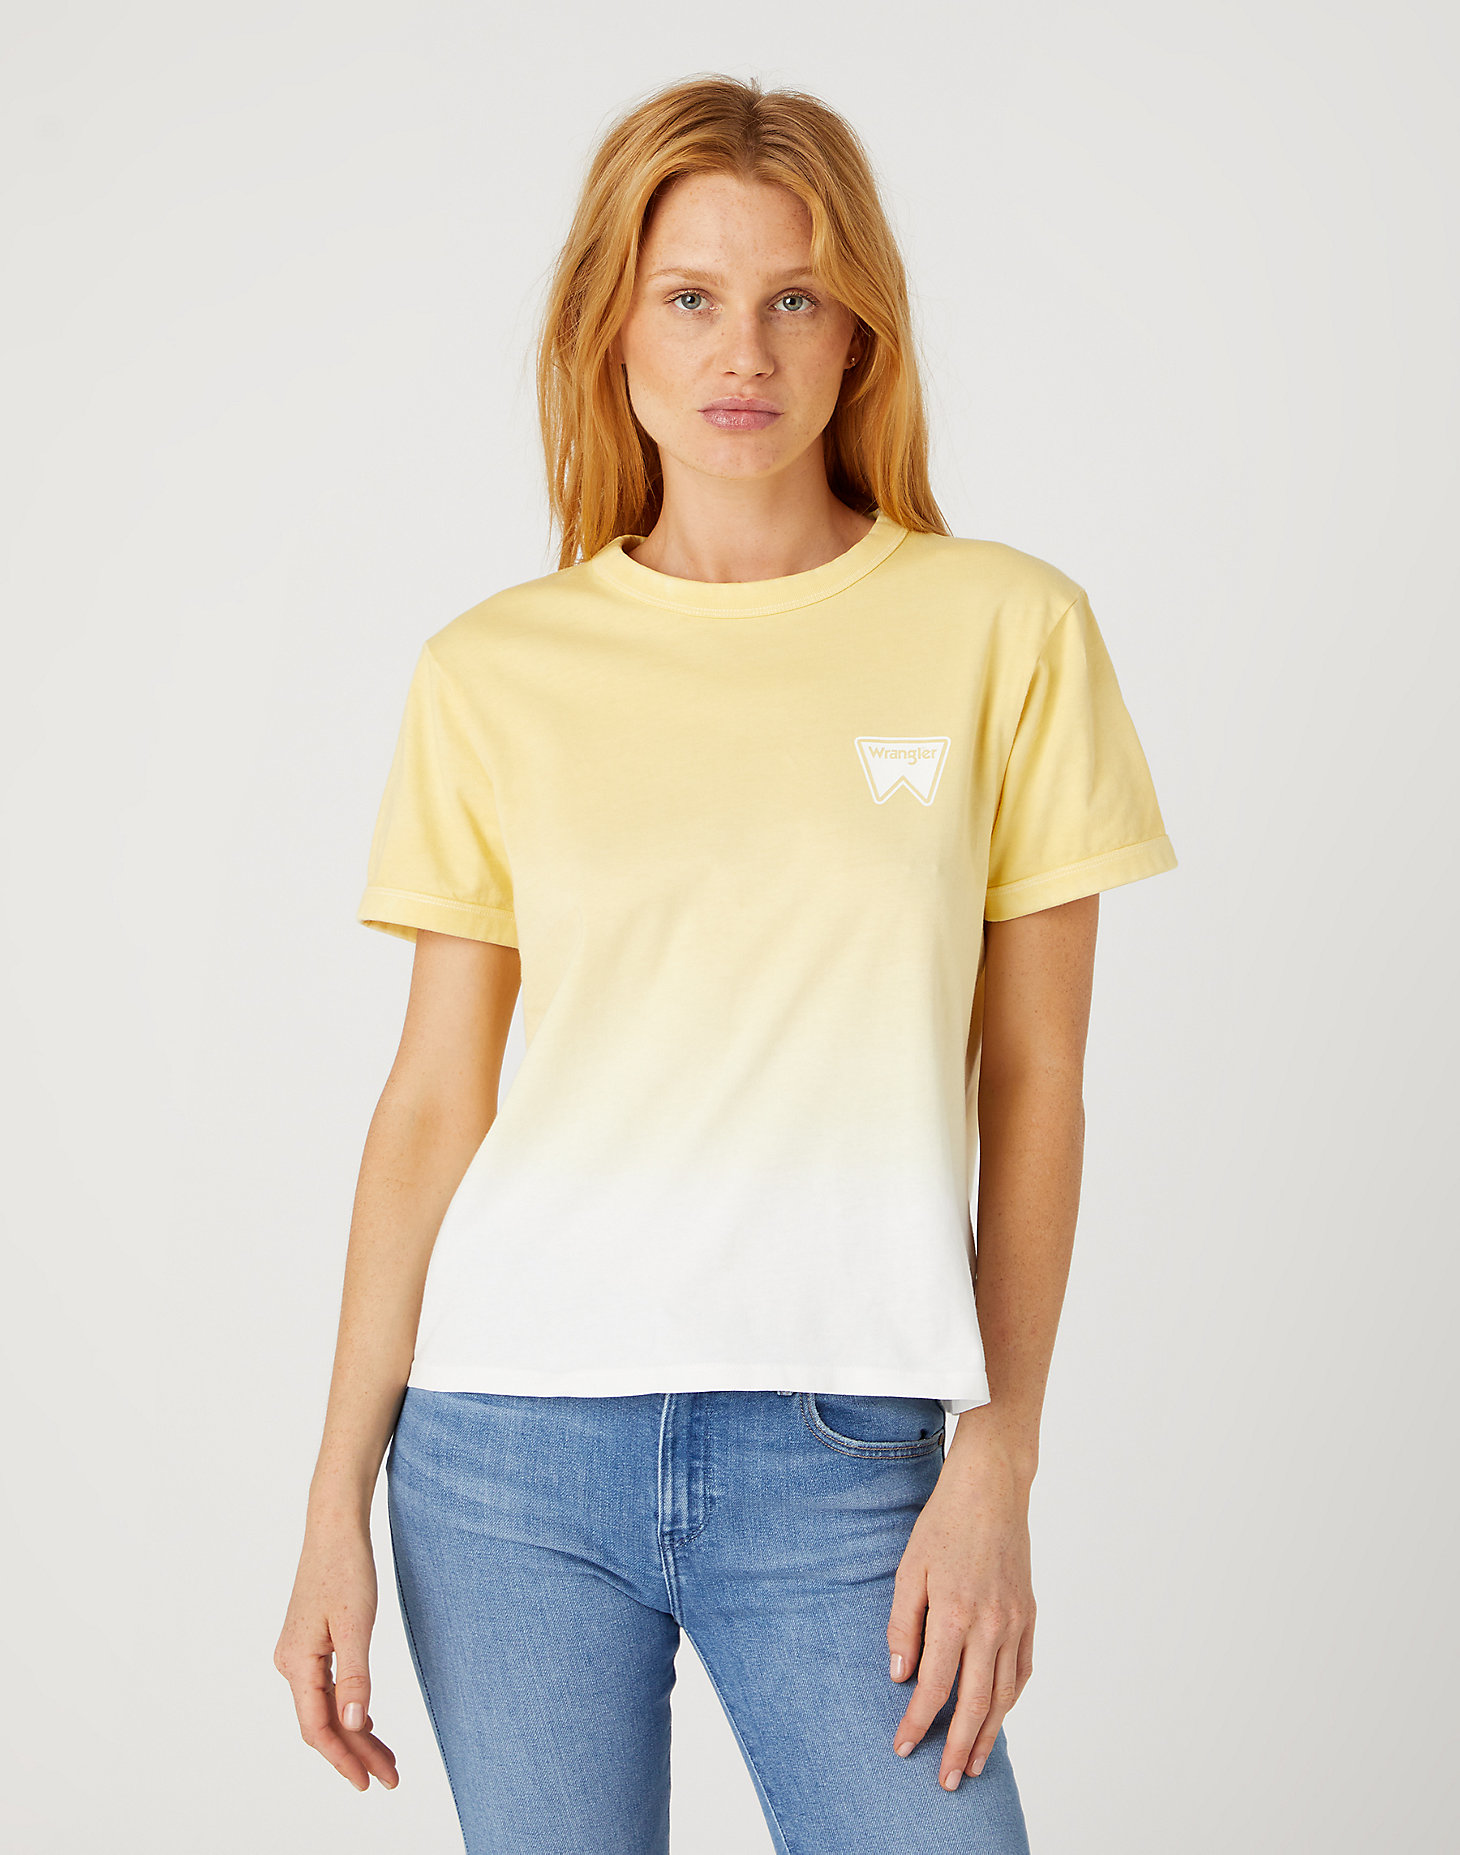 Relaxed Ringer Tee in Pale Banana main view